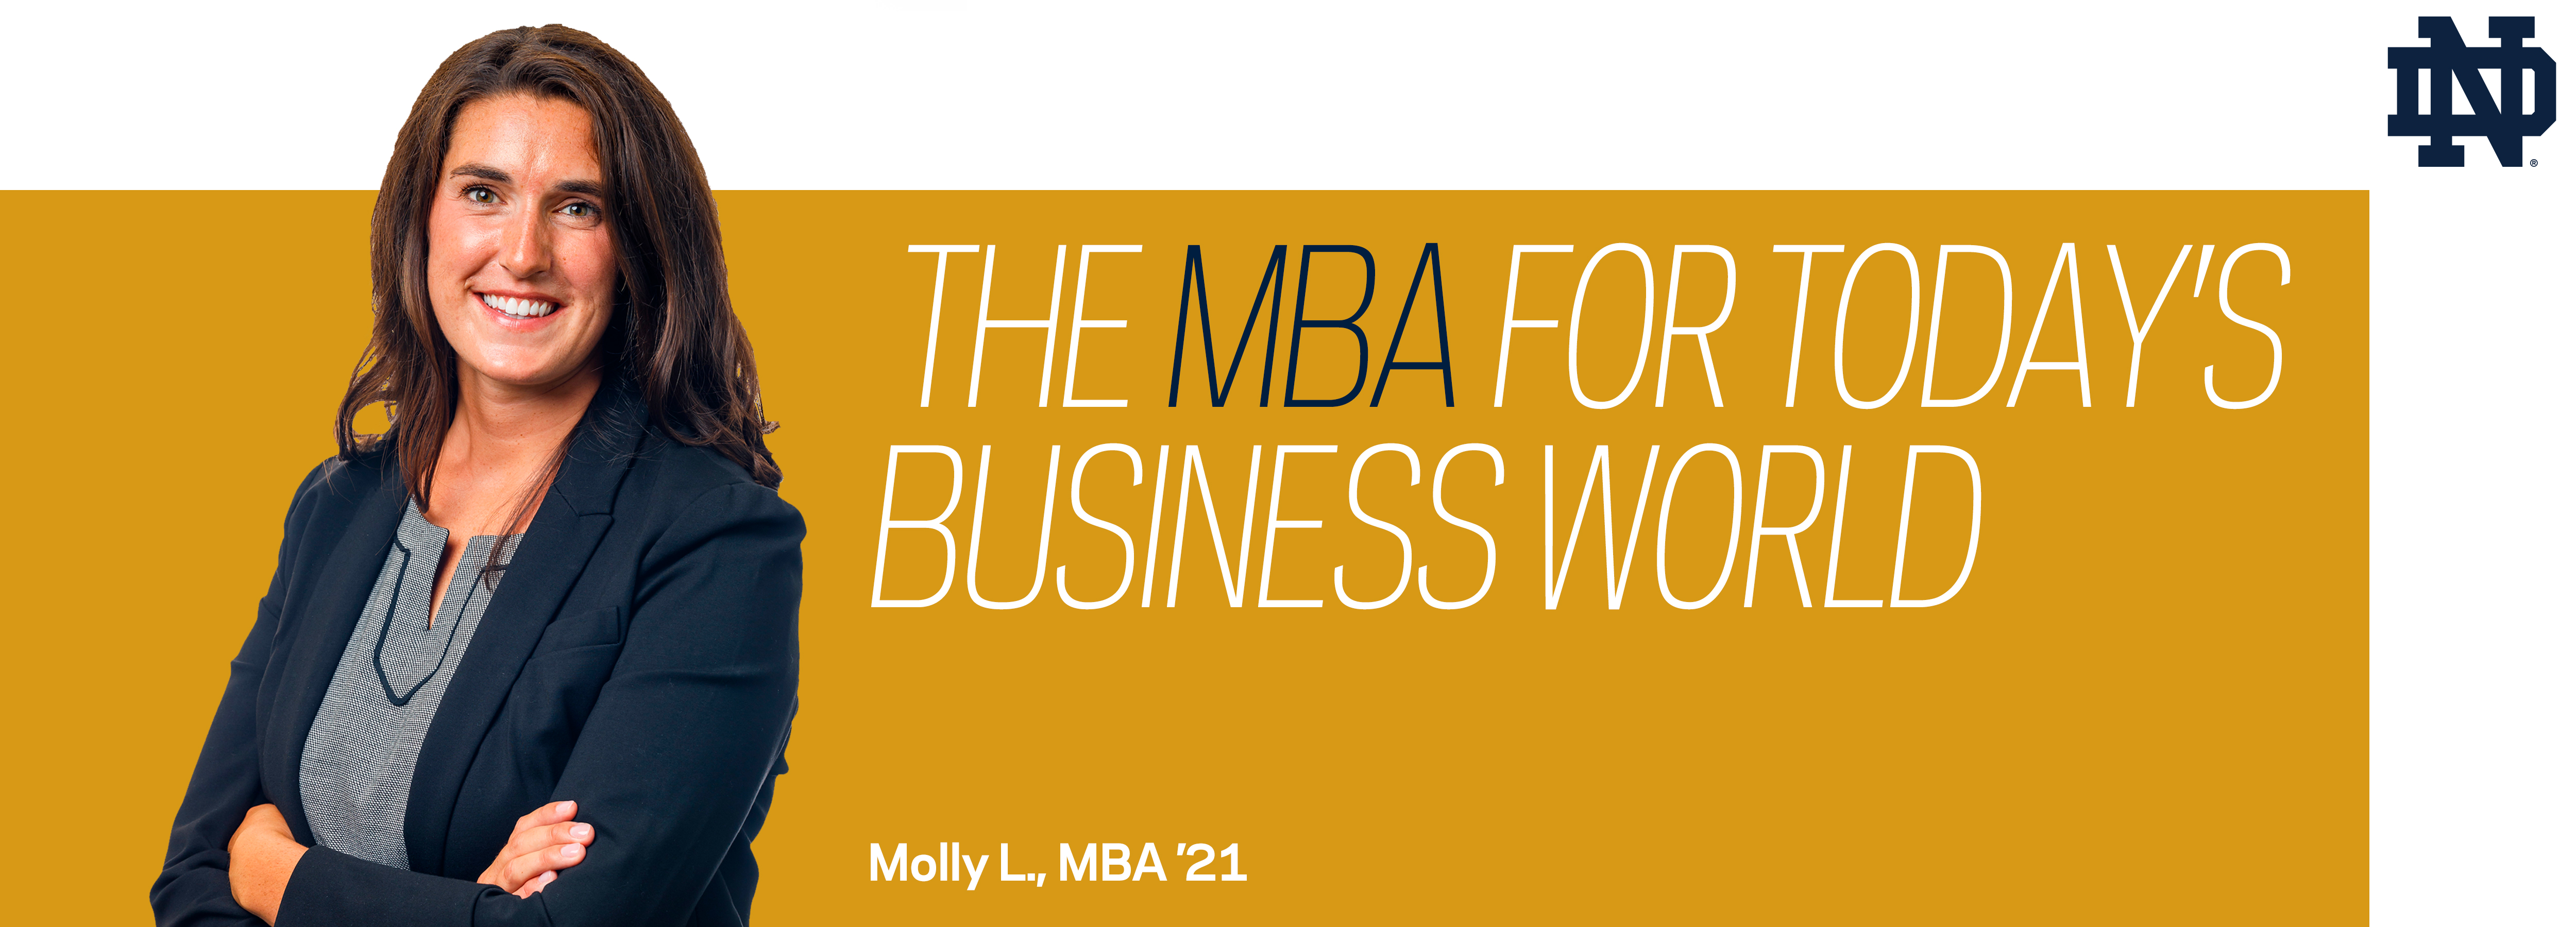 Notre Dame MBA student Molly L. The MBA for today's business world. 